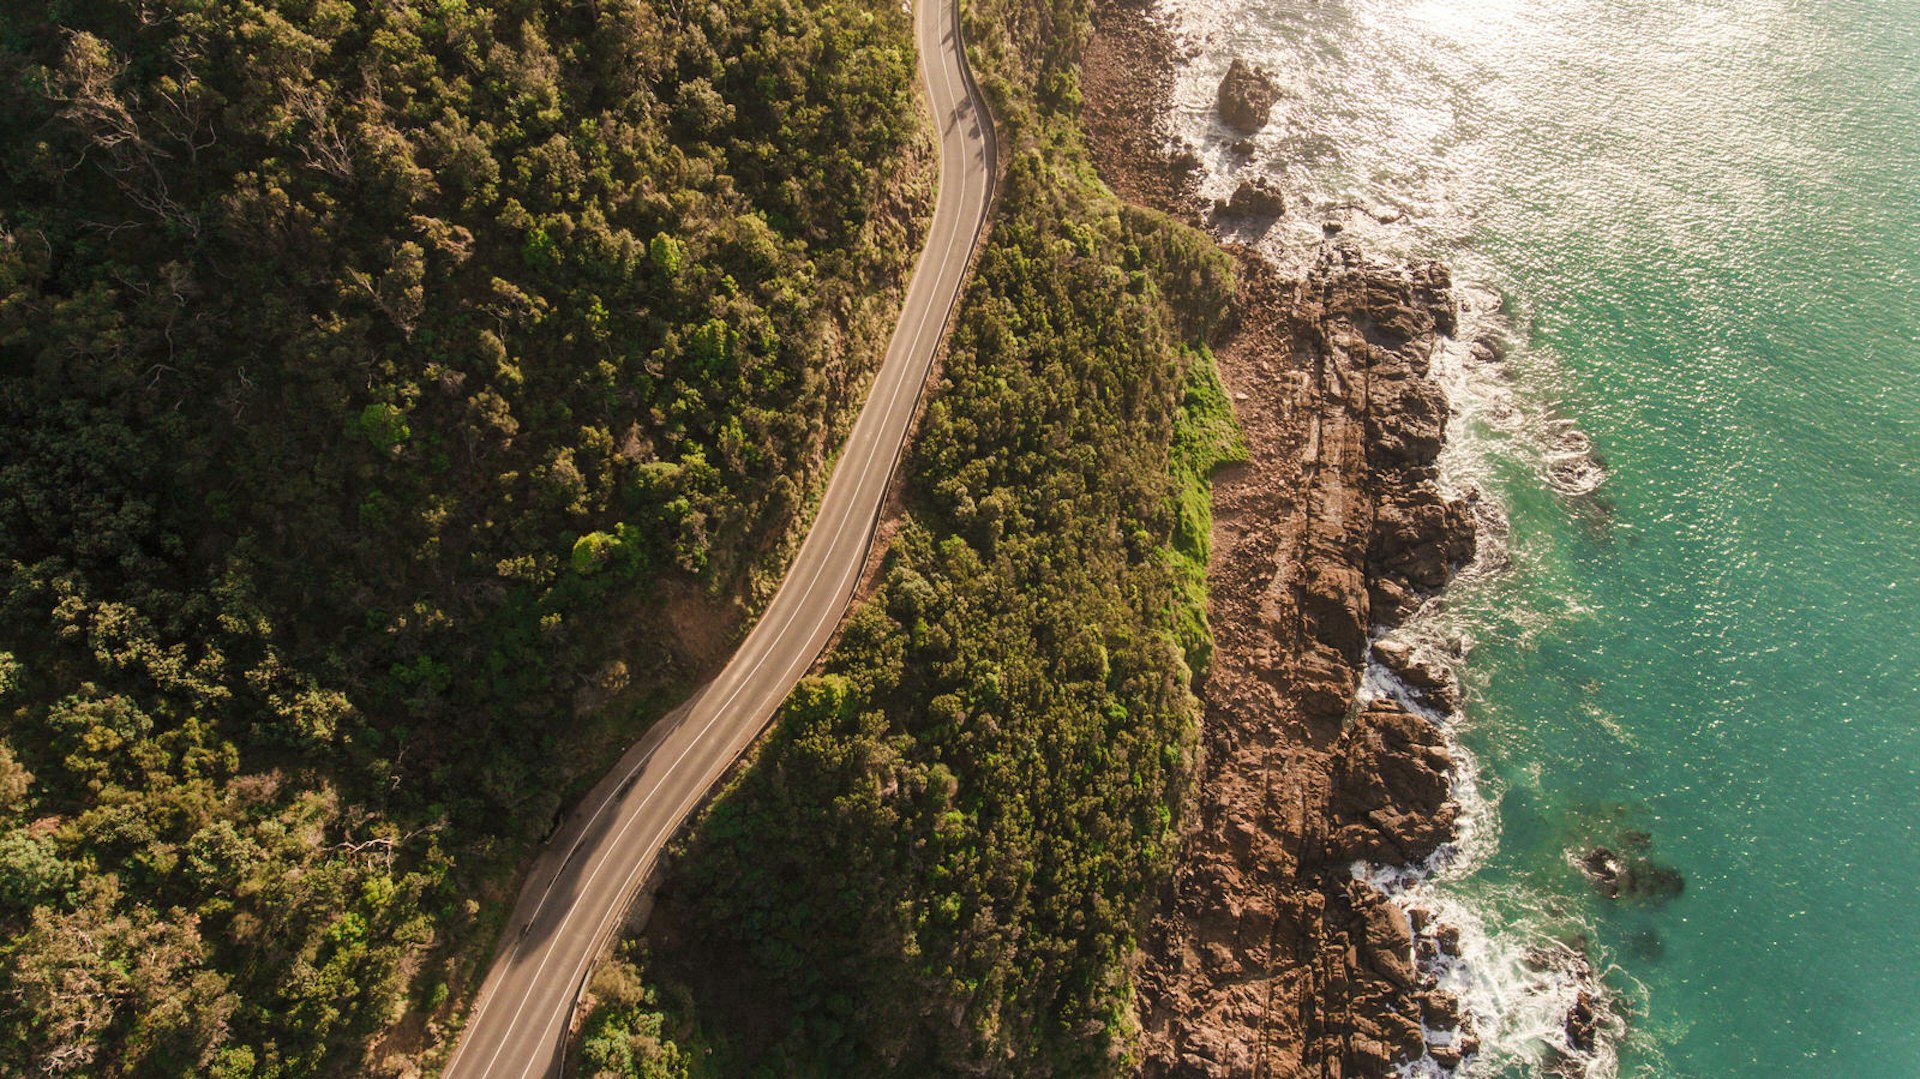 An aerial view of the Great Ocean Road, with a strip of tarmac running alongside the turquoise sea